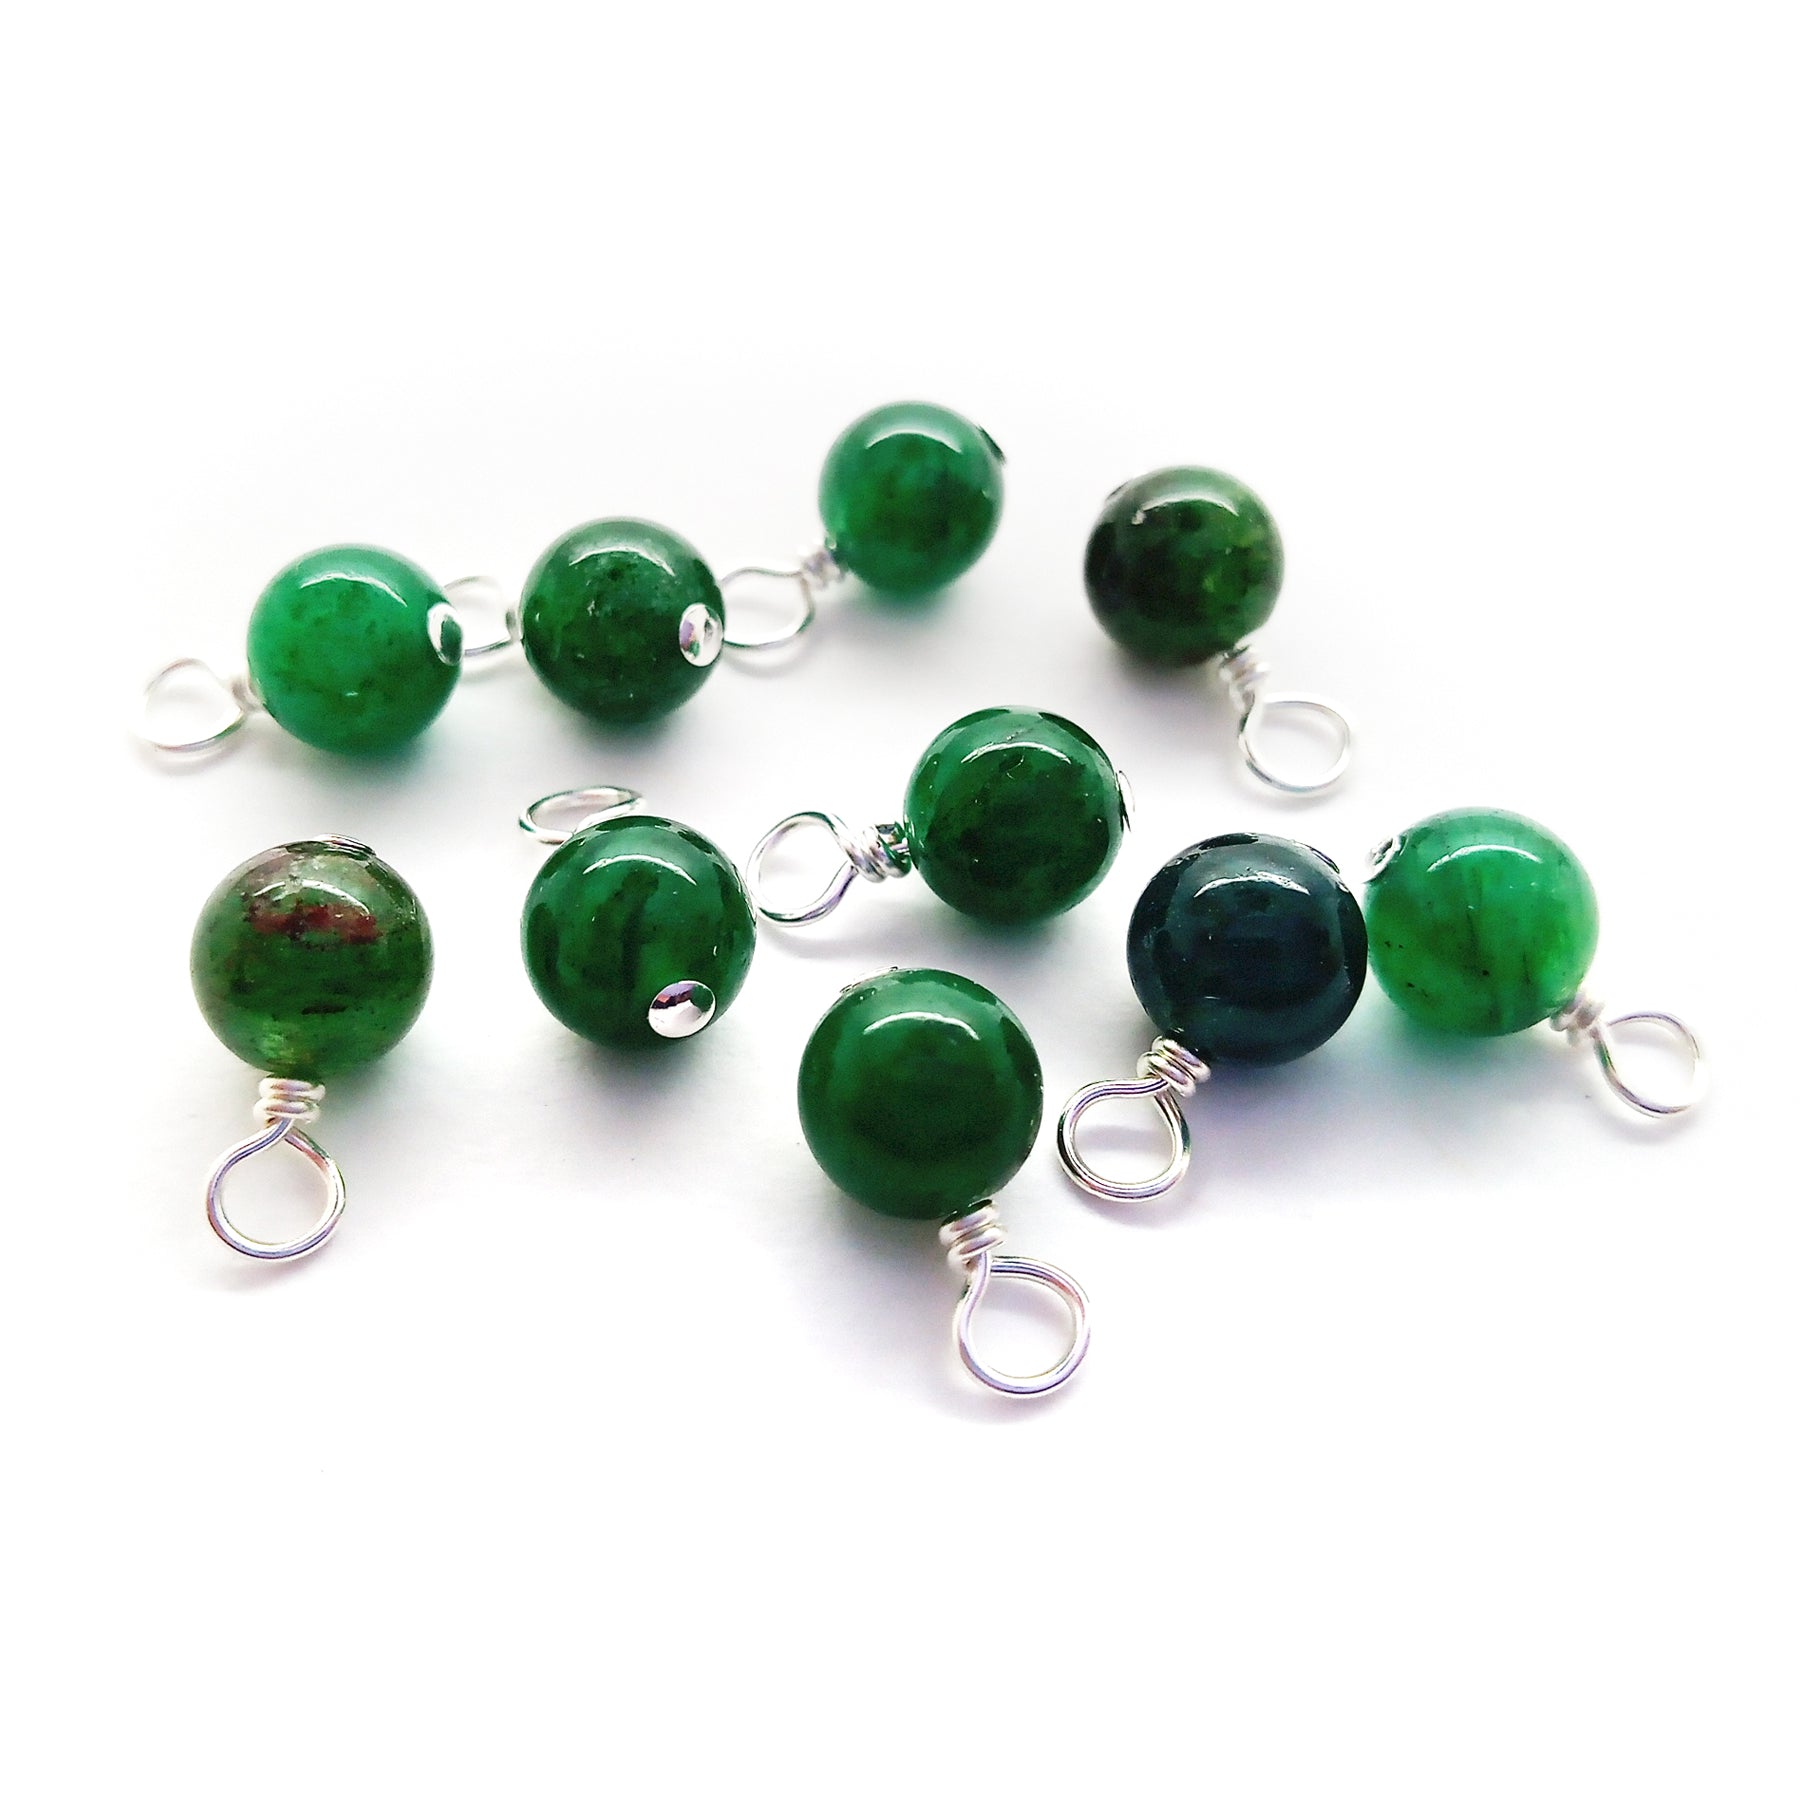 Bright green muscovite charms made from 6mm round gemstone beads.